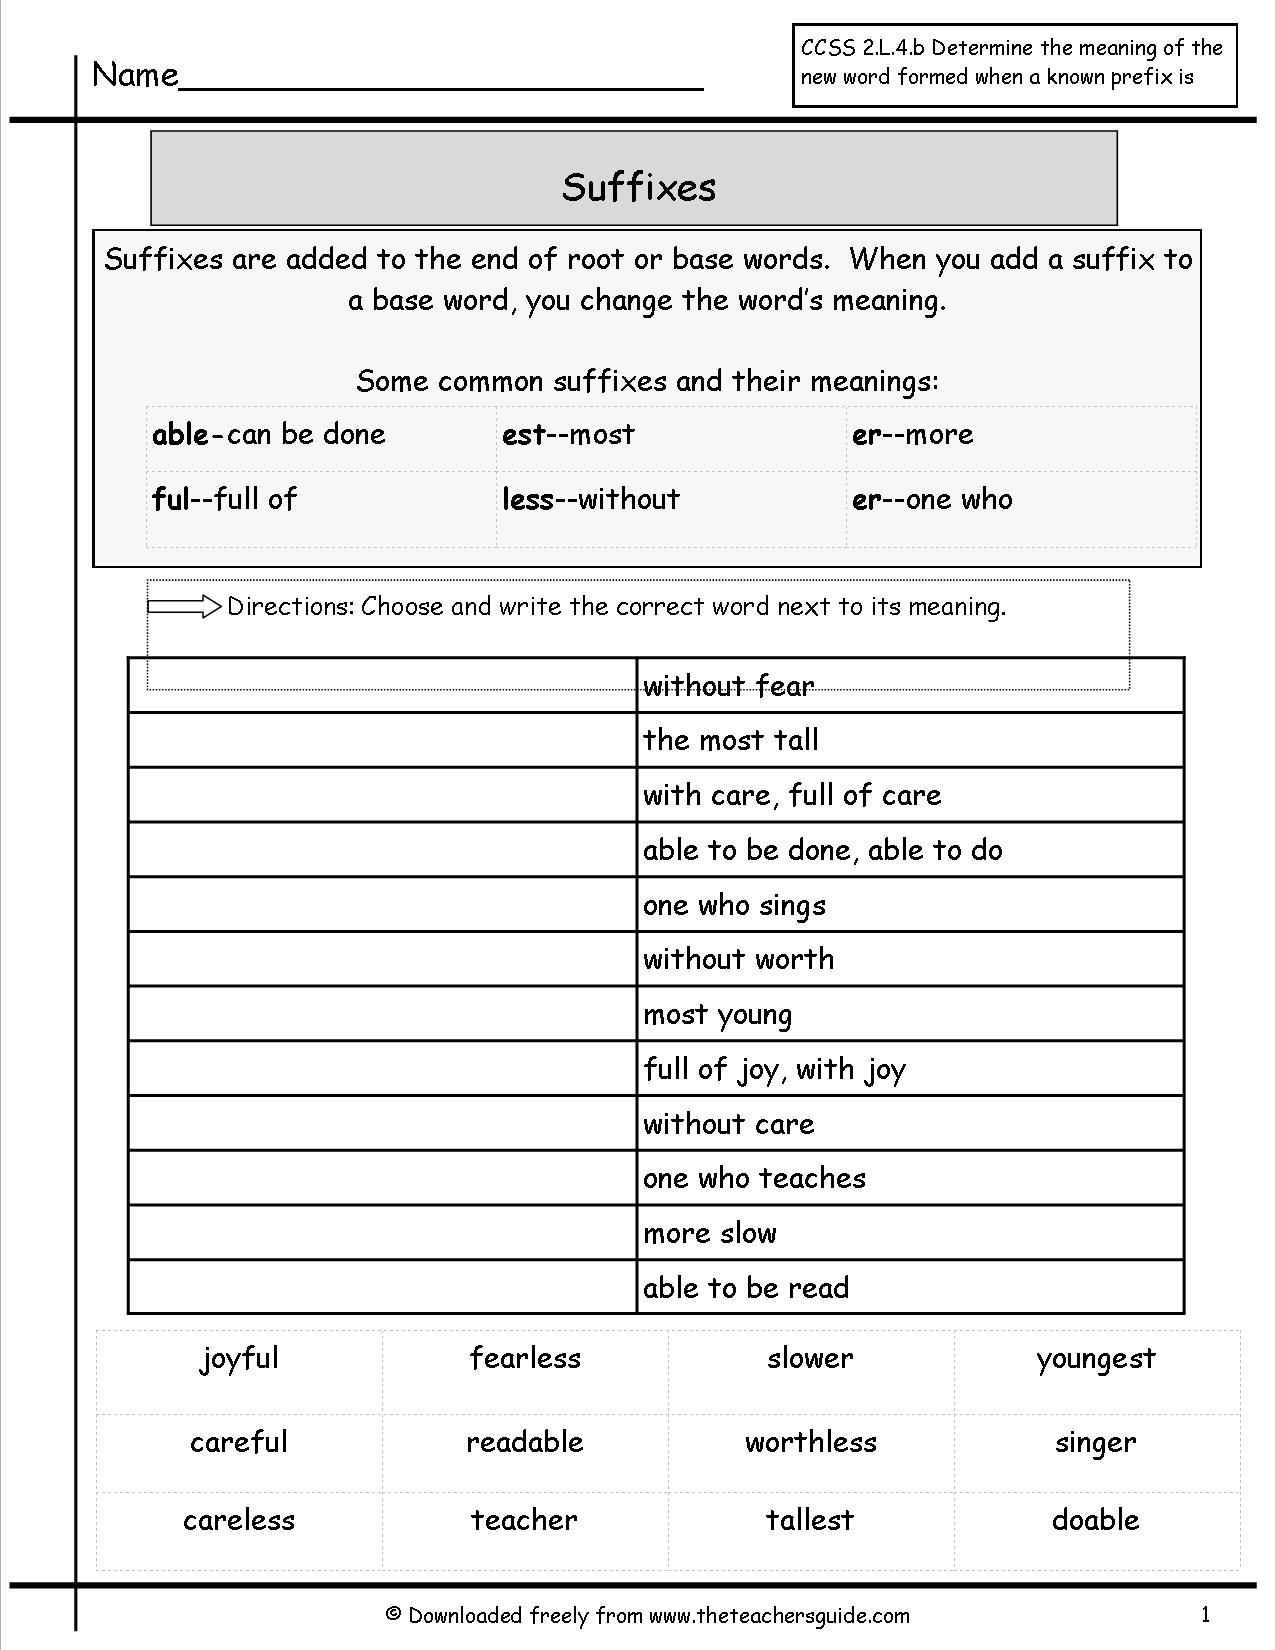 English Worksheets Exercises as Well as Kids English Grammar Worksheet for Class 2 English Grammar